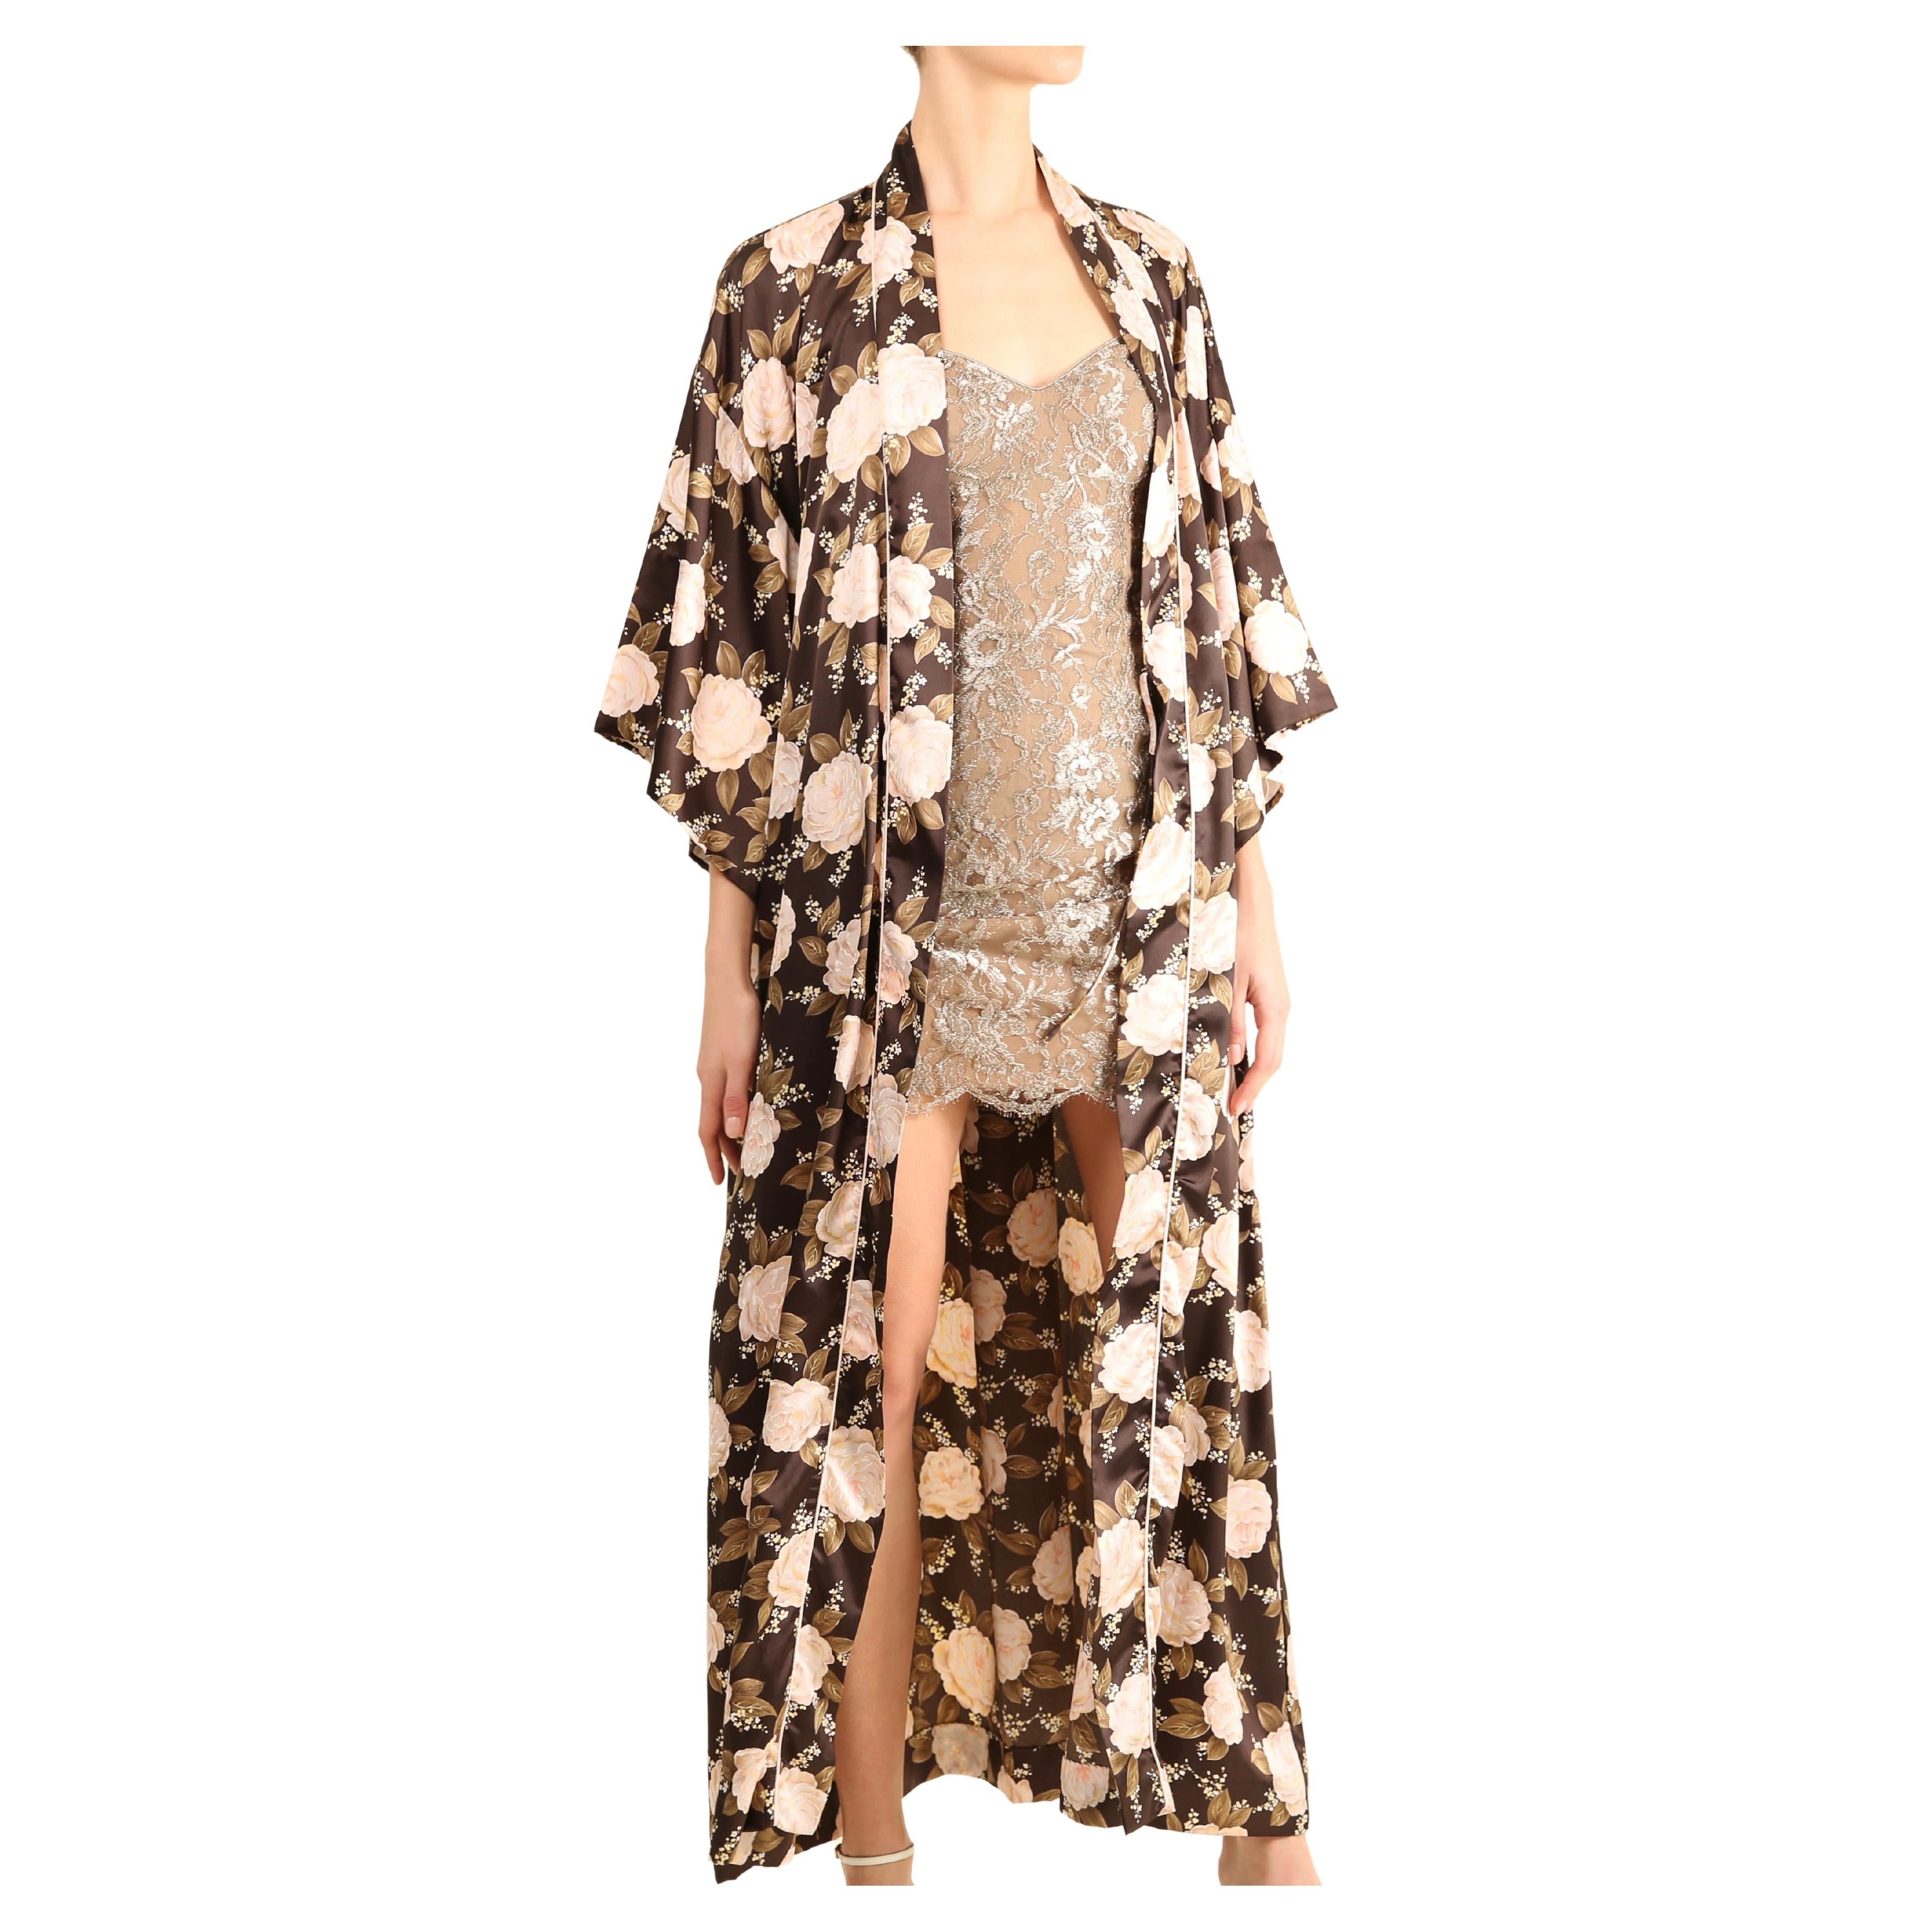 Christian Dior vintage brown pink floral kimono maxi coat dress robe night gown For Sale